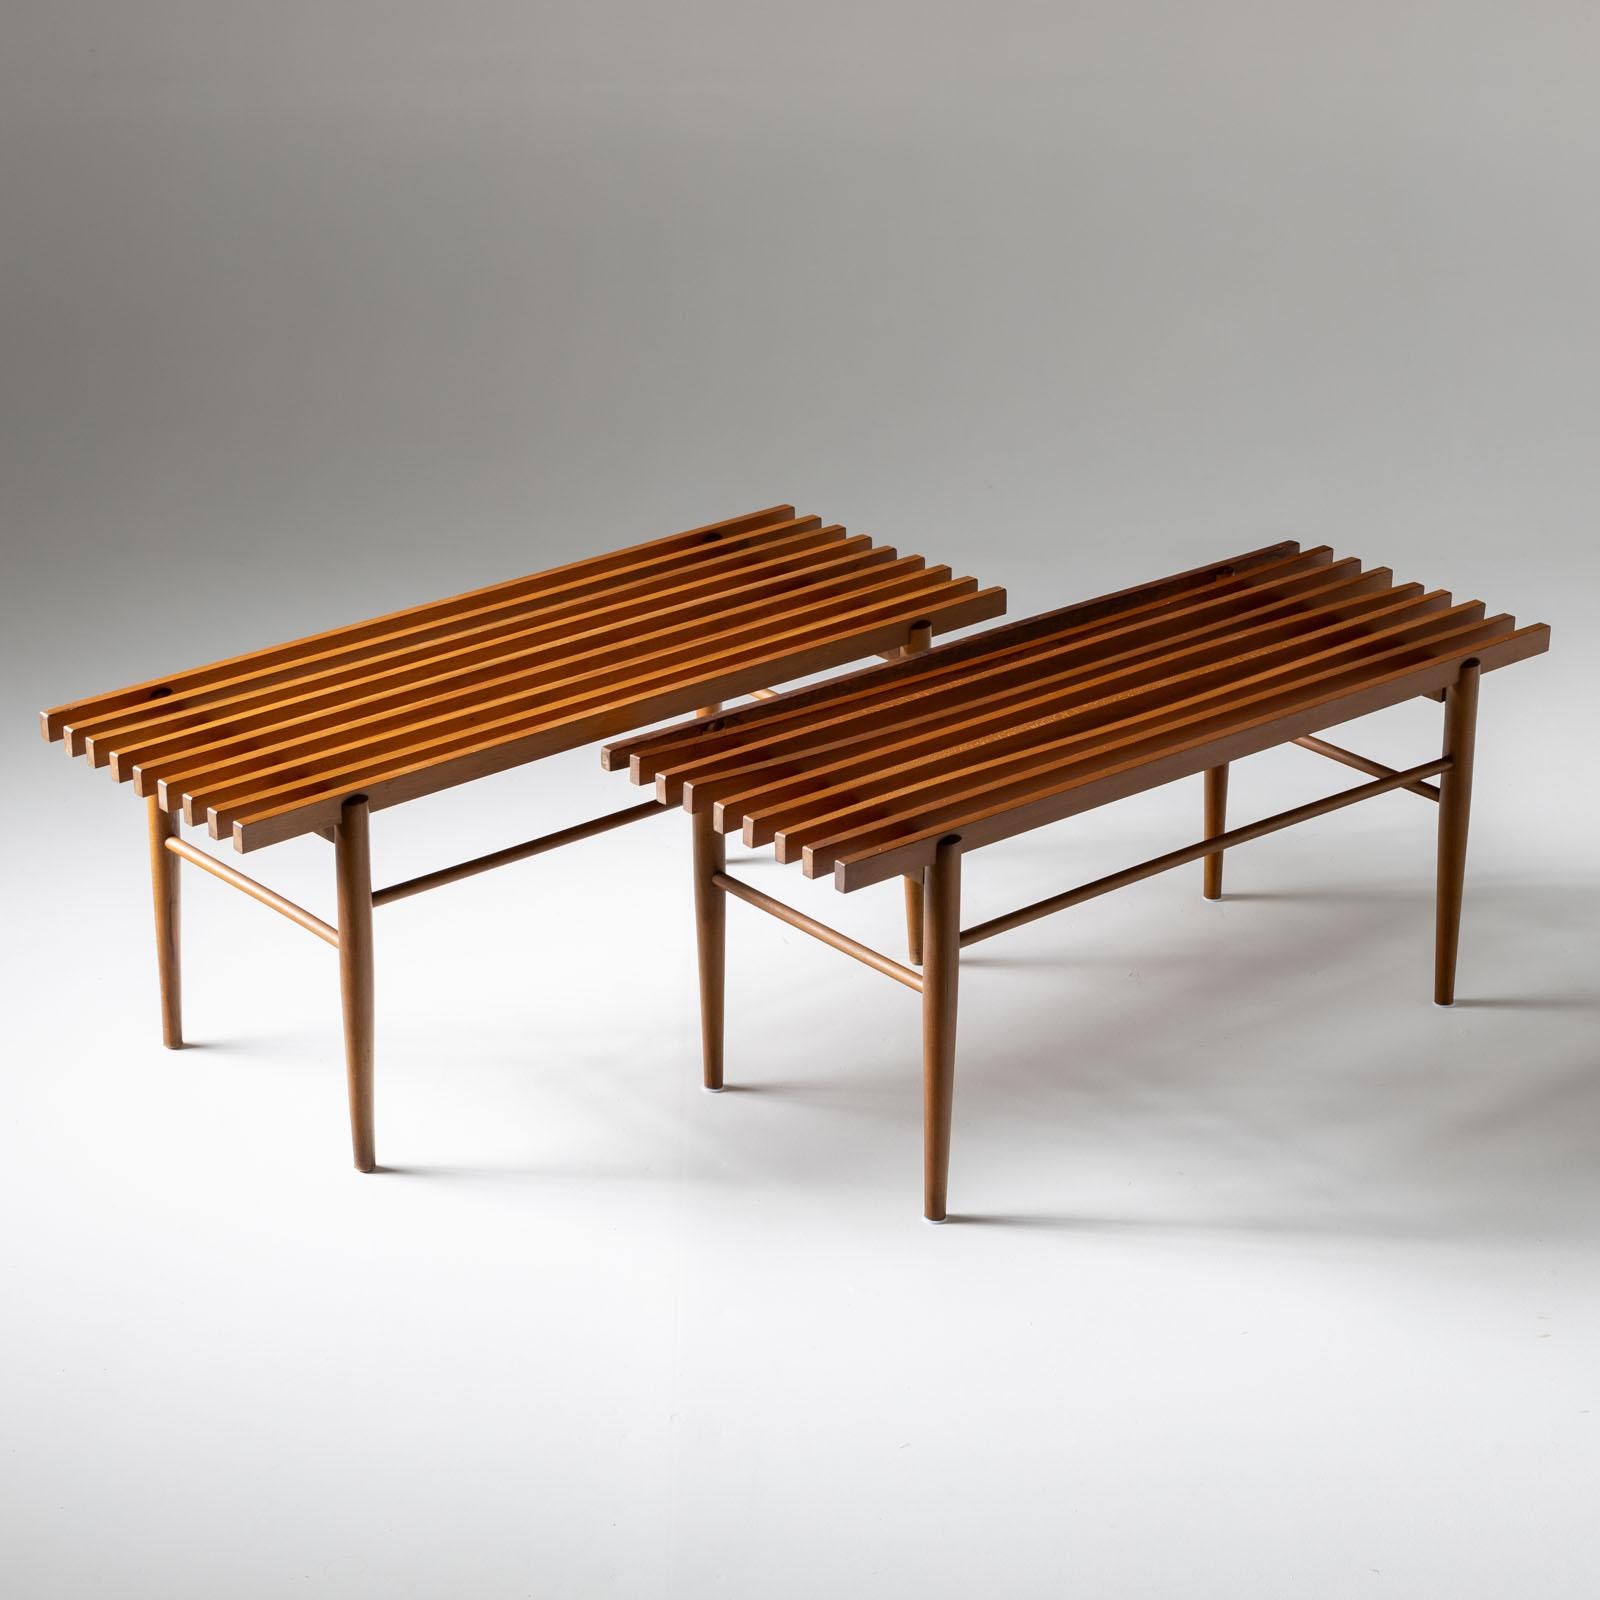 Italian Slatted Wooden Benches, Italy Mid-20th Century For Sale